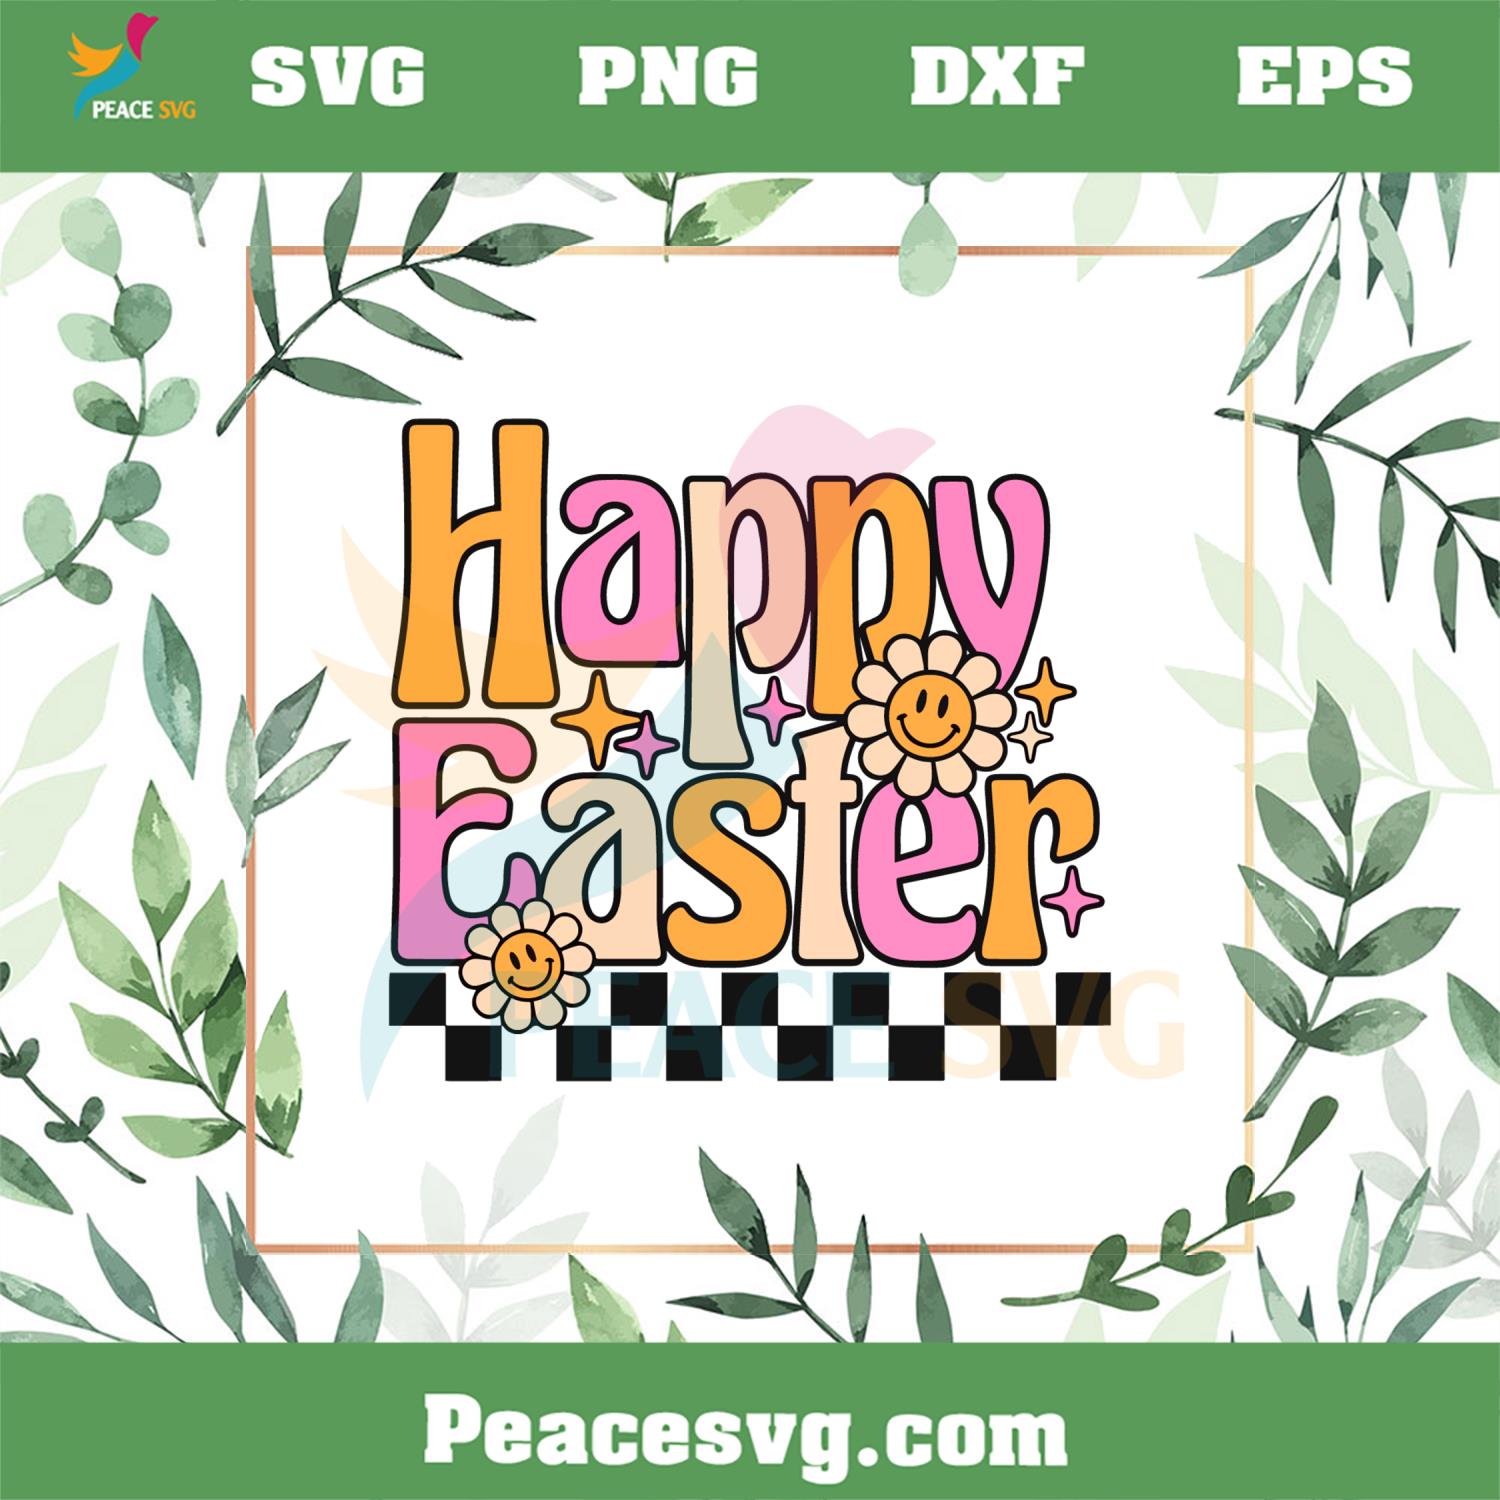 Grovy Happy Easter Day Daisy Smiley Face SVG Cutting Files